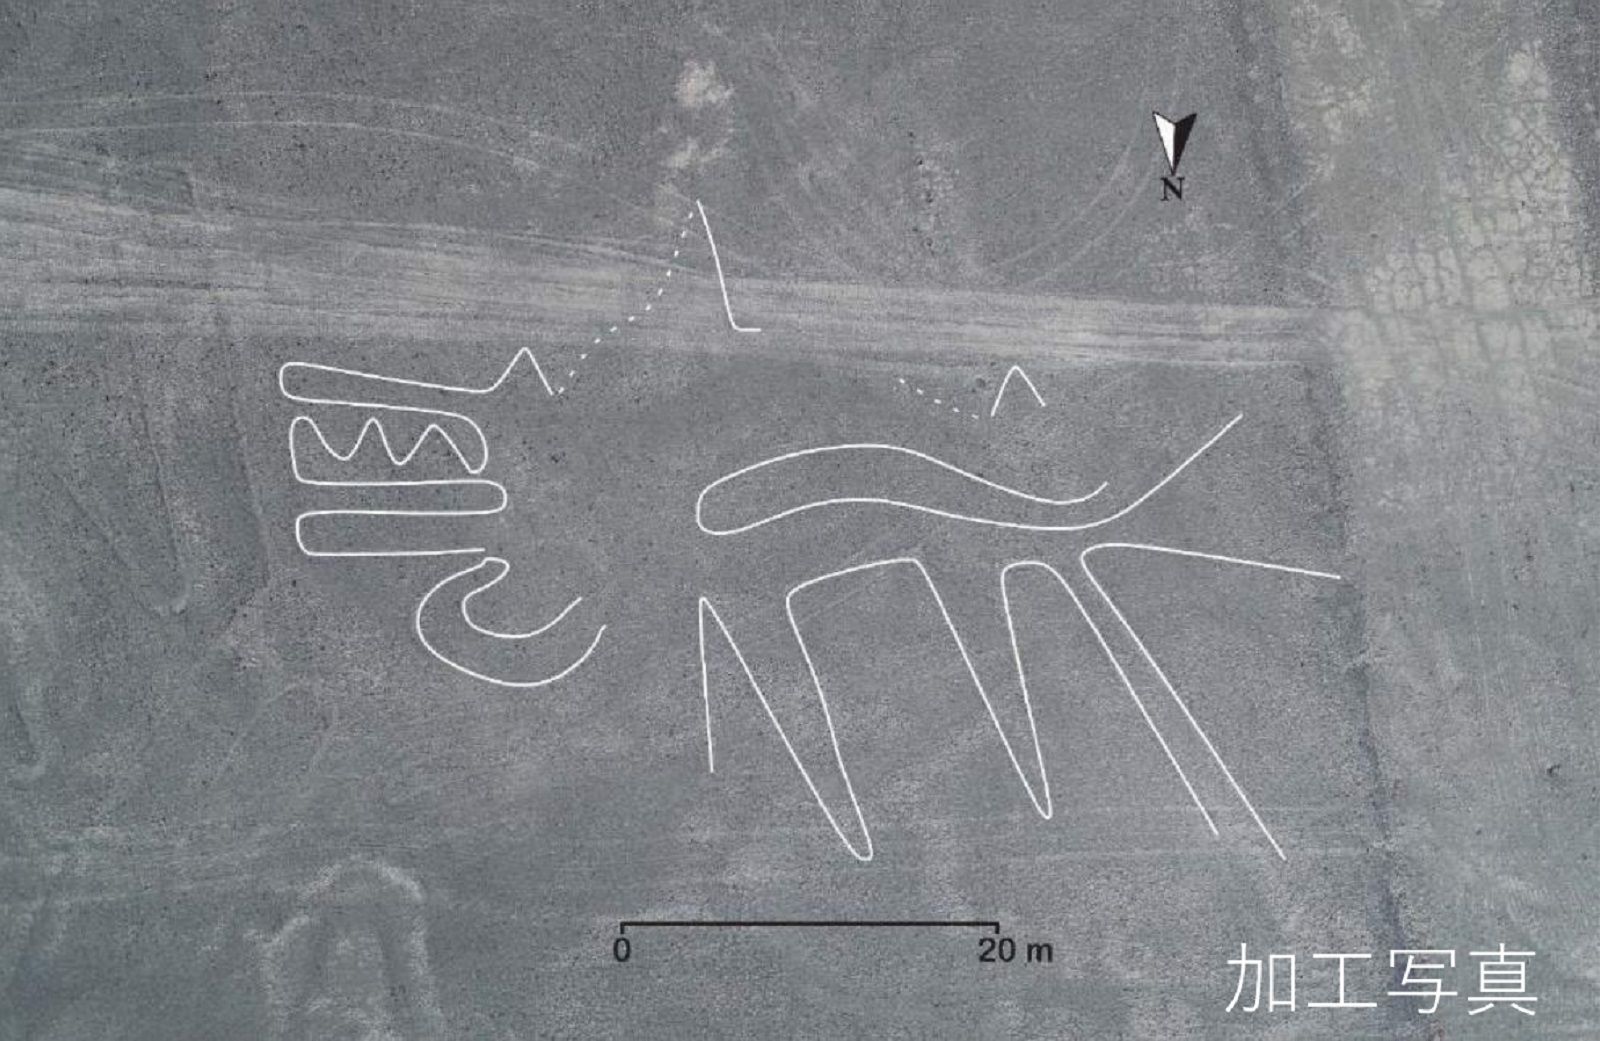 Scientists use IBM AI to discover mysterious drawings in Peru image 12